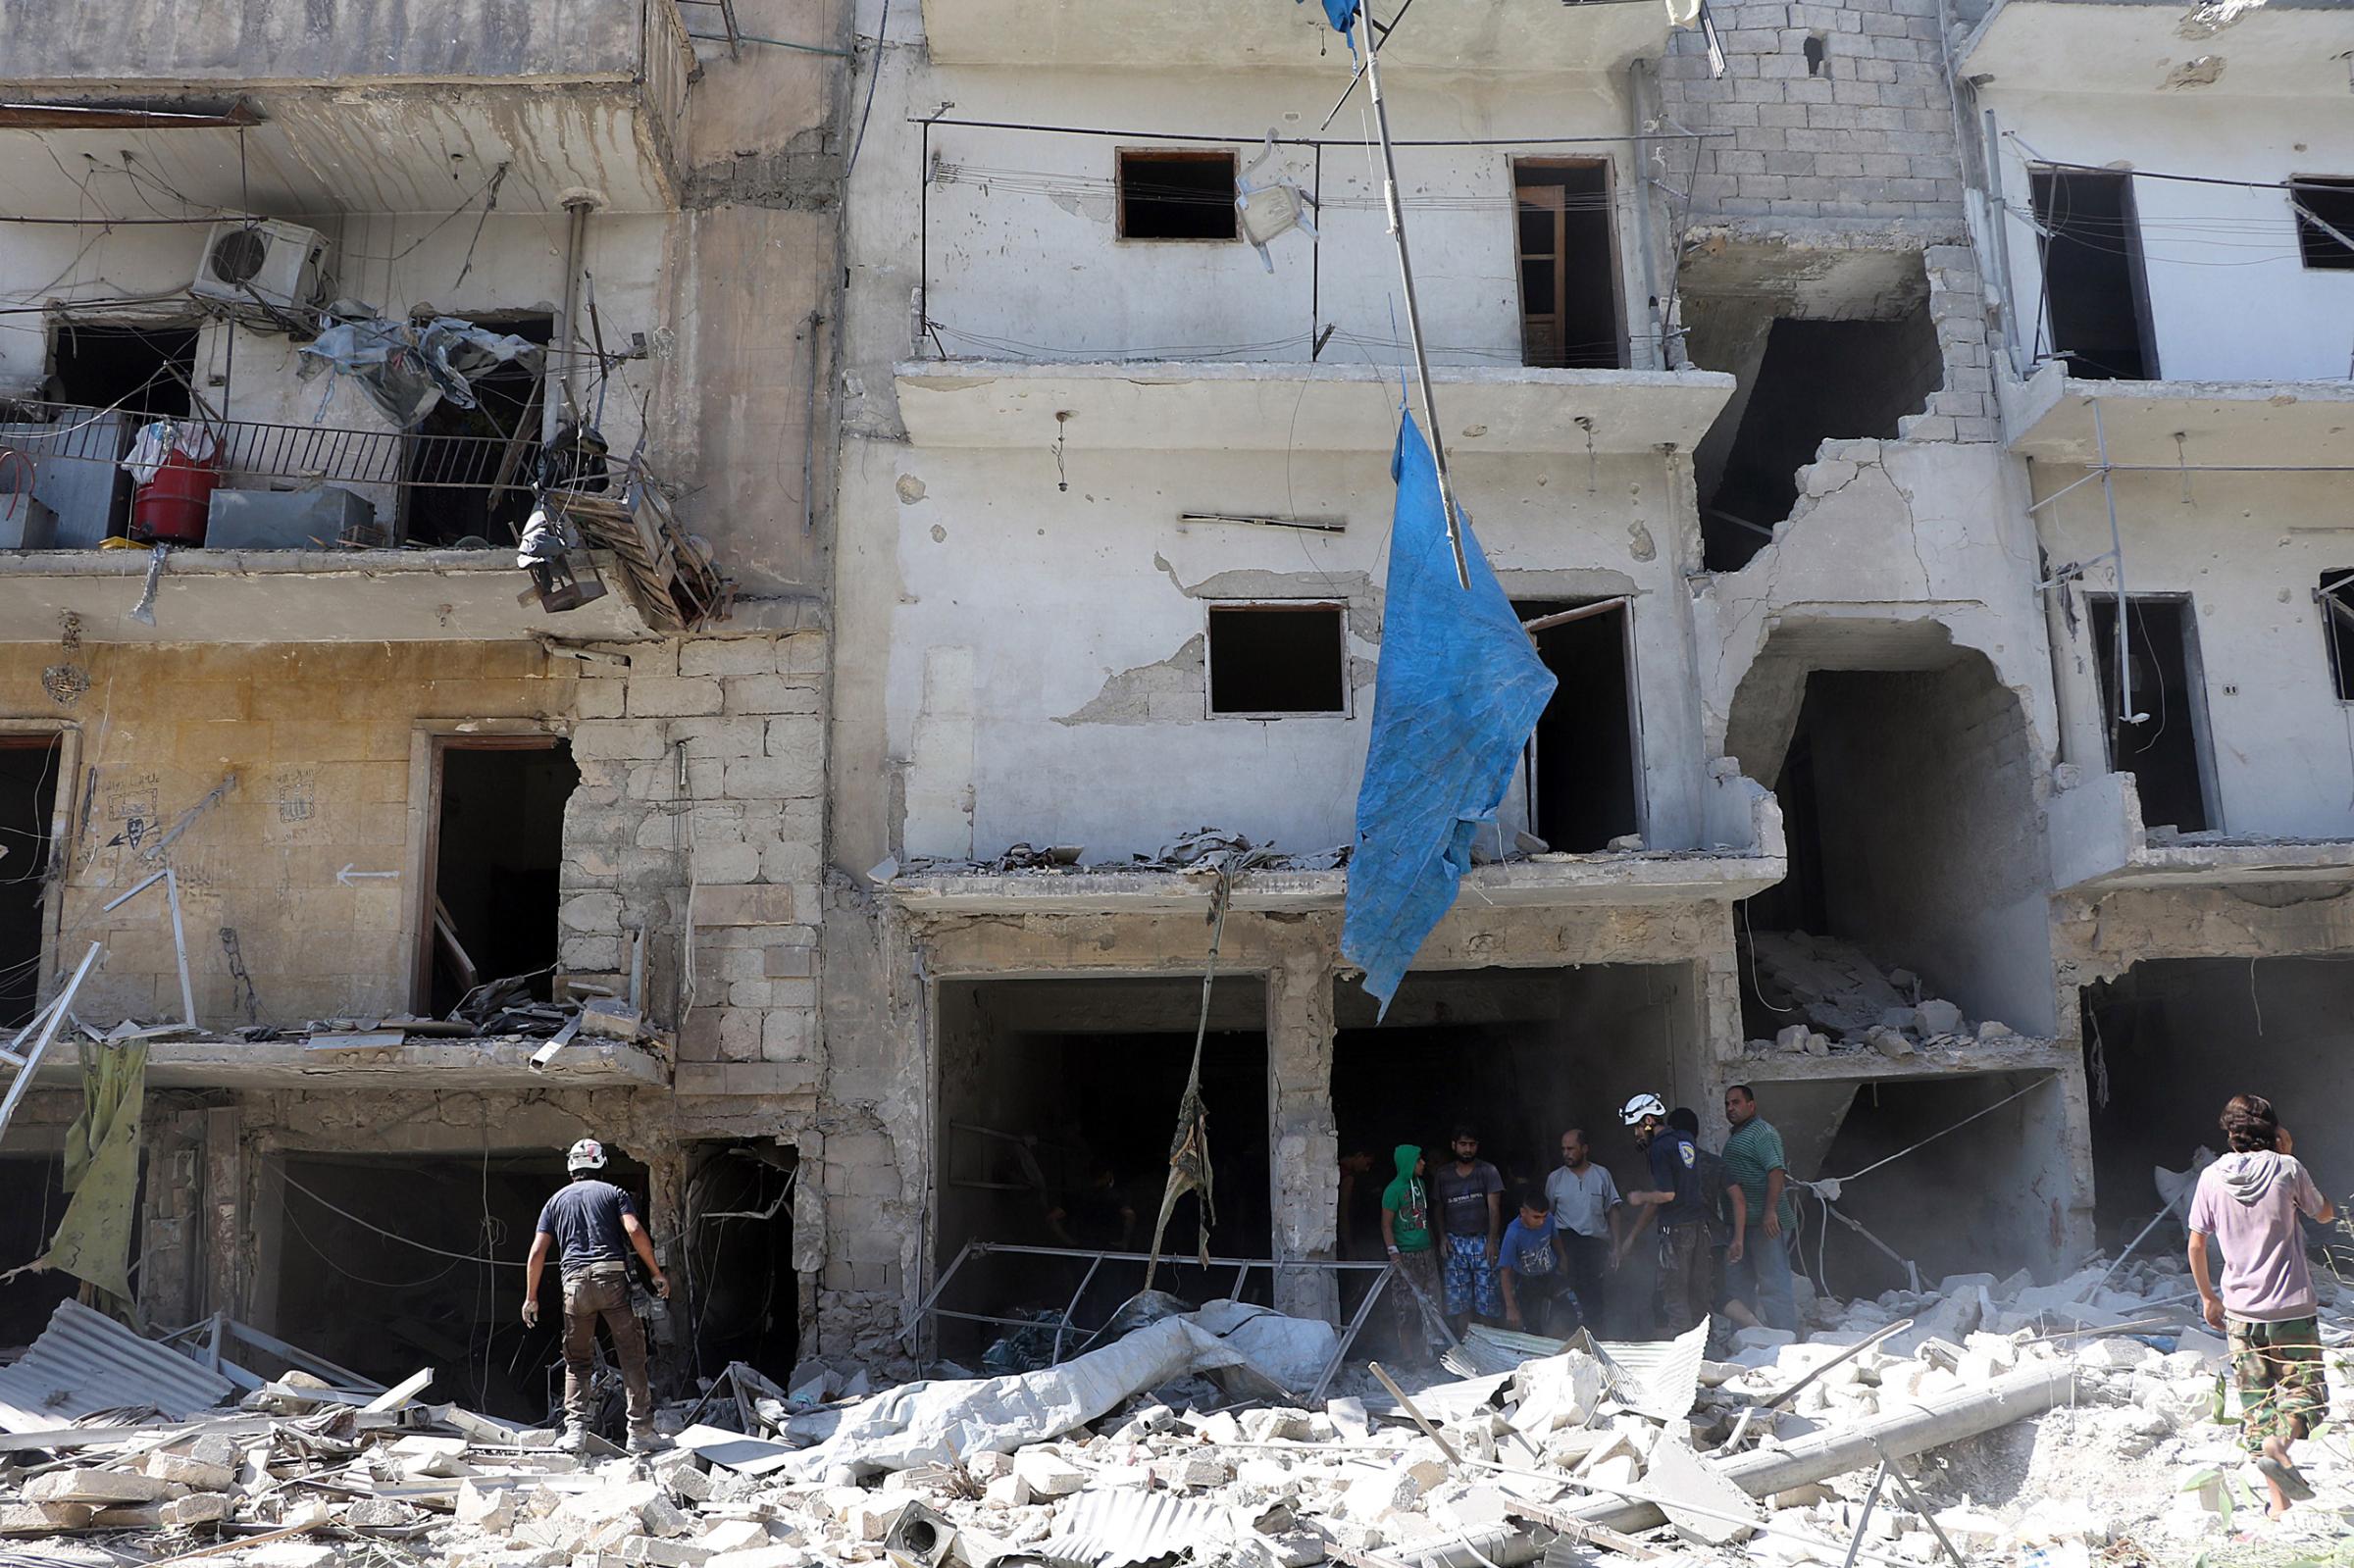 Search and rescue team members inspect the debris of buildings after Russian army aircrafts hit residential areas in the Sukari district of Aleppo, Syria, on Sept. 7, 2016.